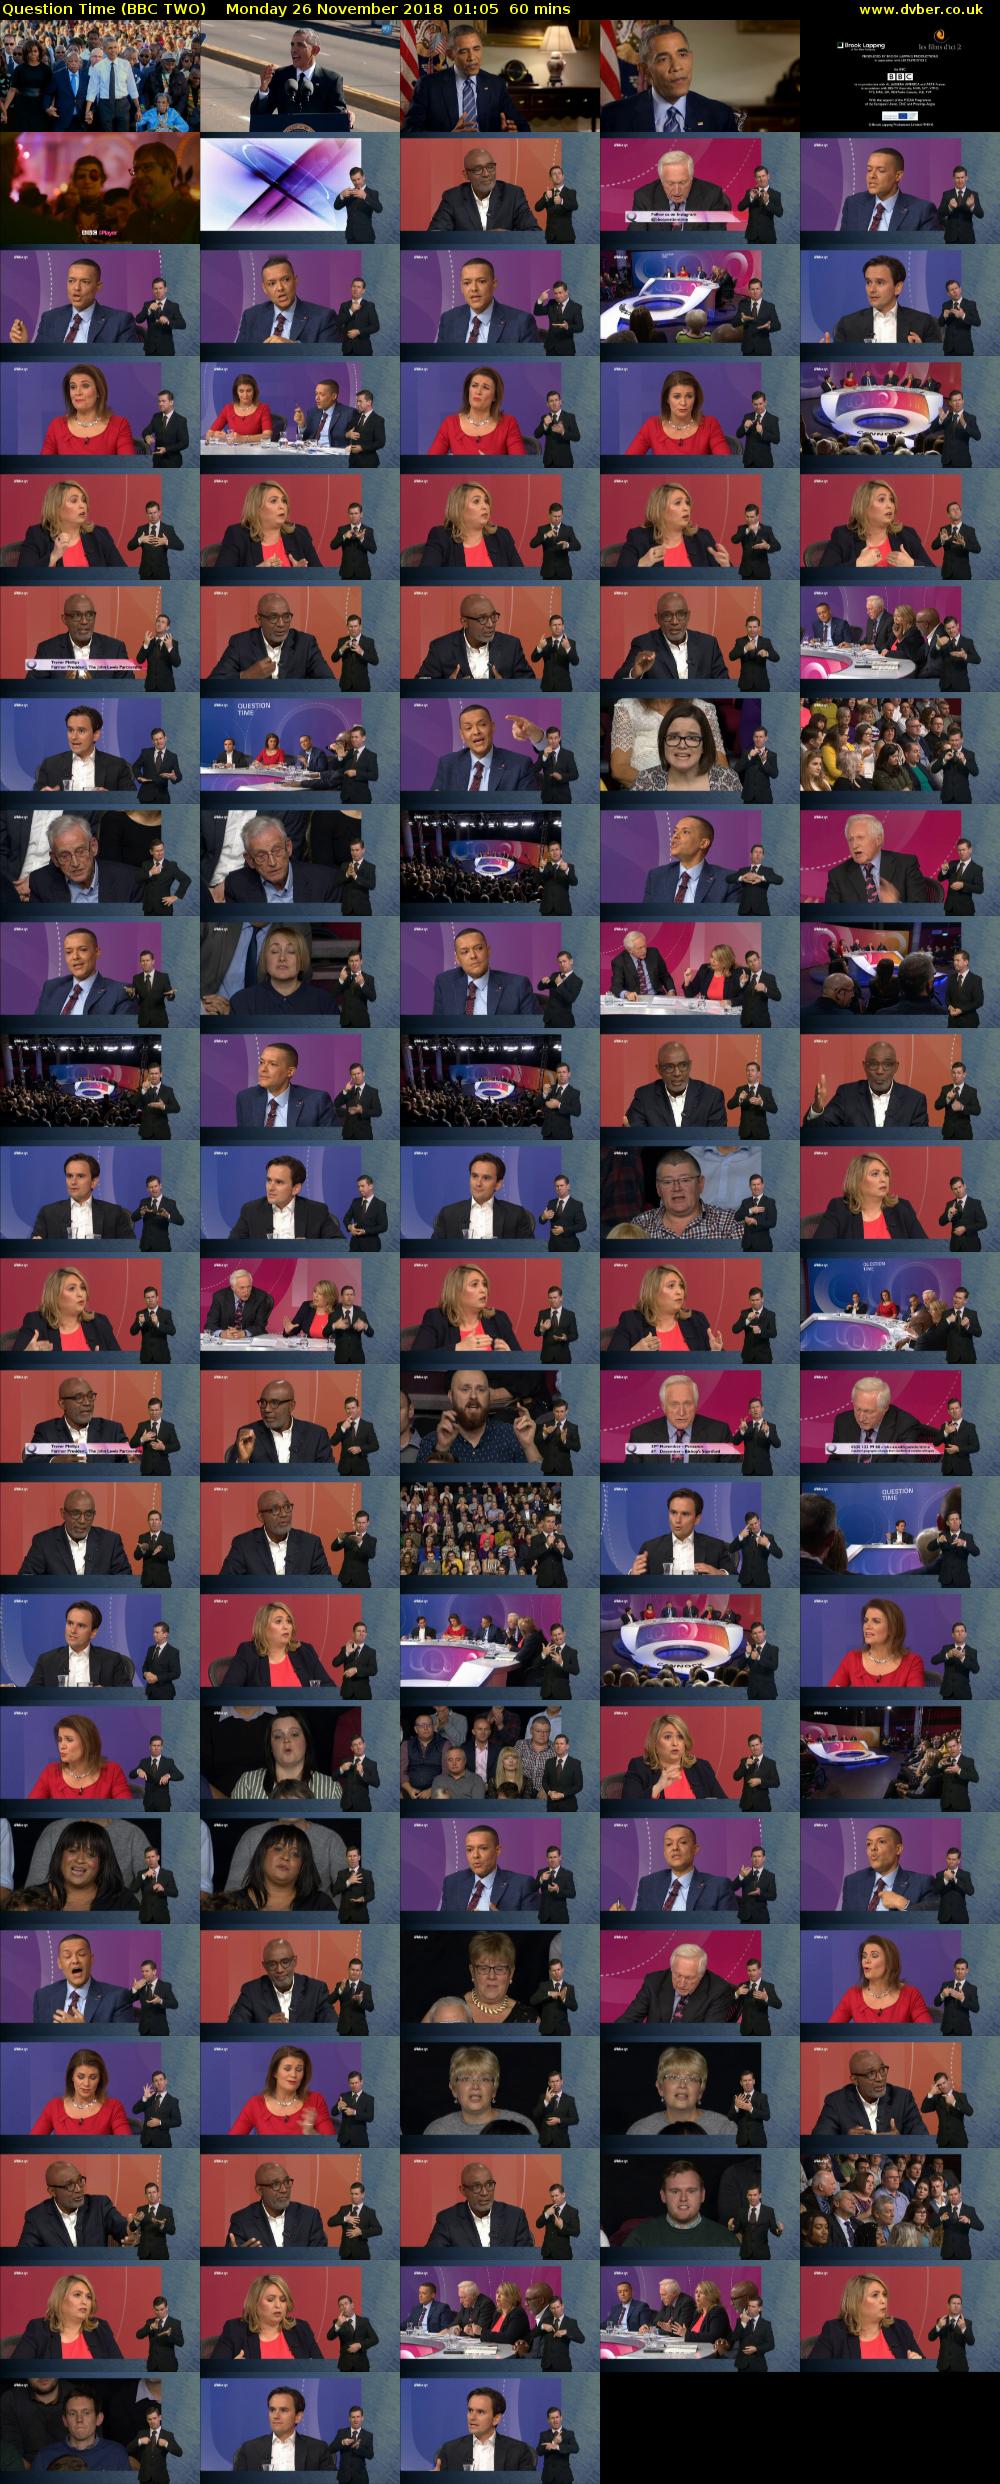 Question Time (BBC TWO) Monday 26 November 2018 01:05 - 02:05